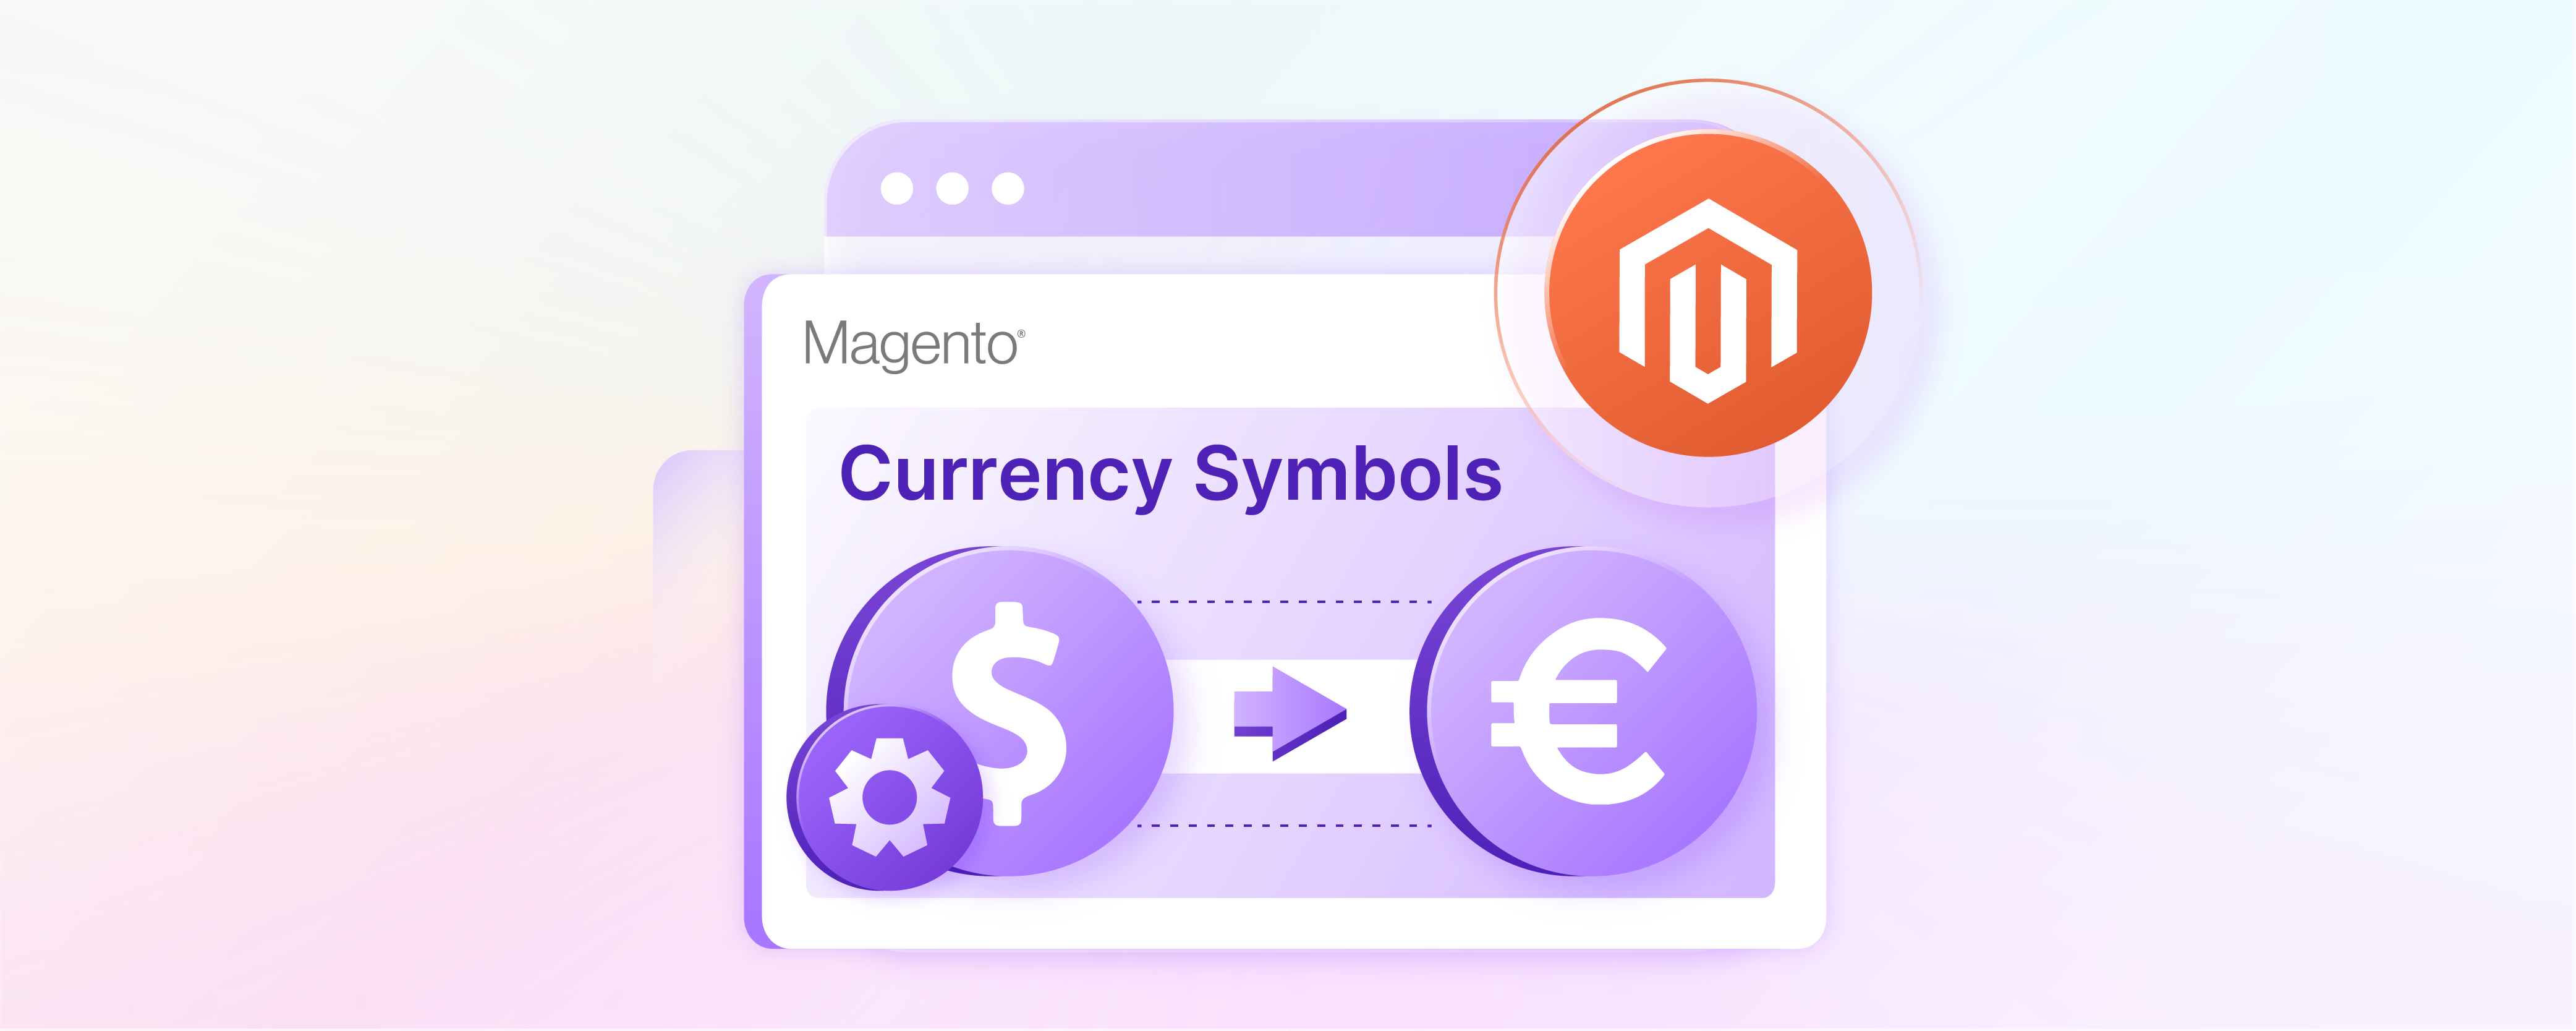 How Do You Customize Magento 2 Currency Symbols?